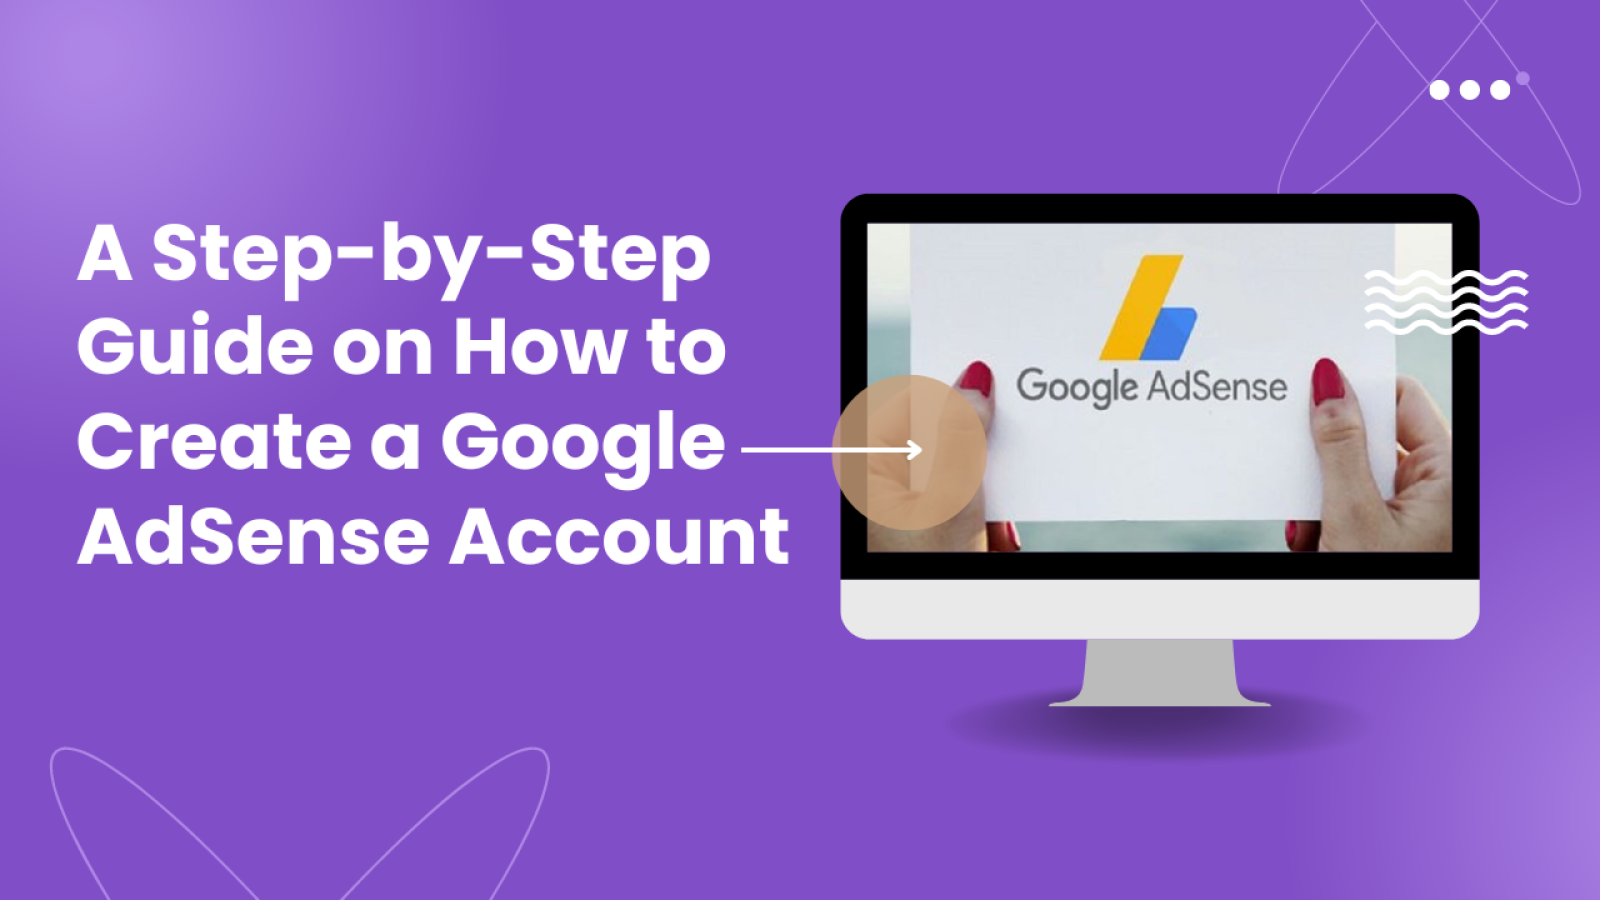 A Step-by-Step Guide on How to Create a Google AdSense Account